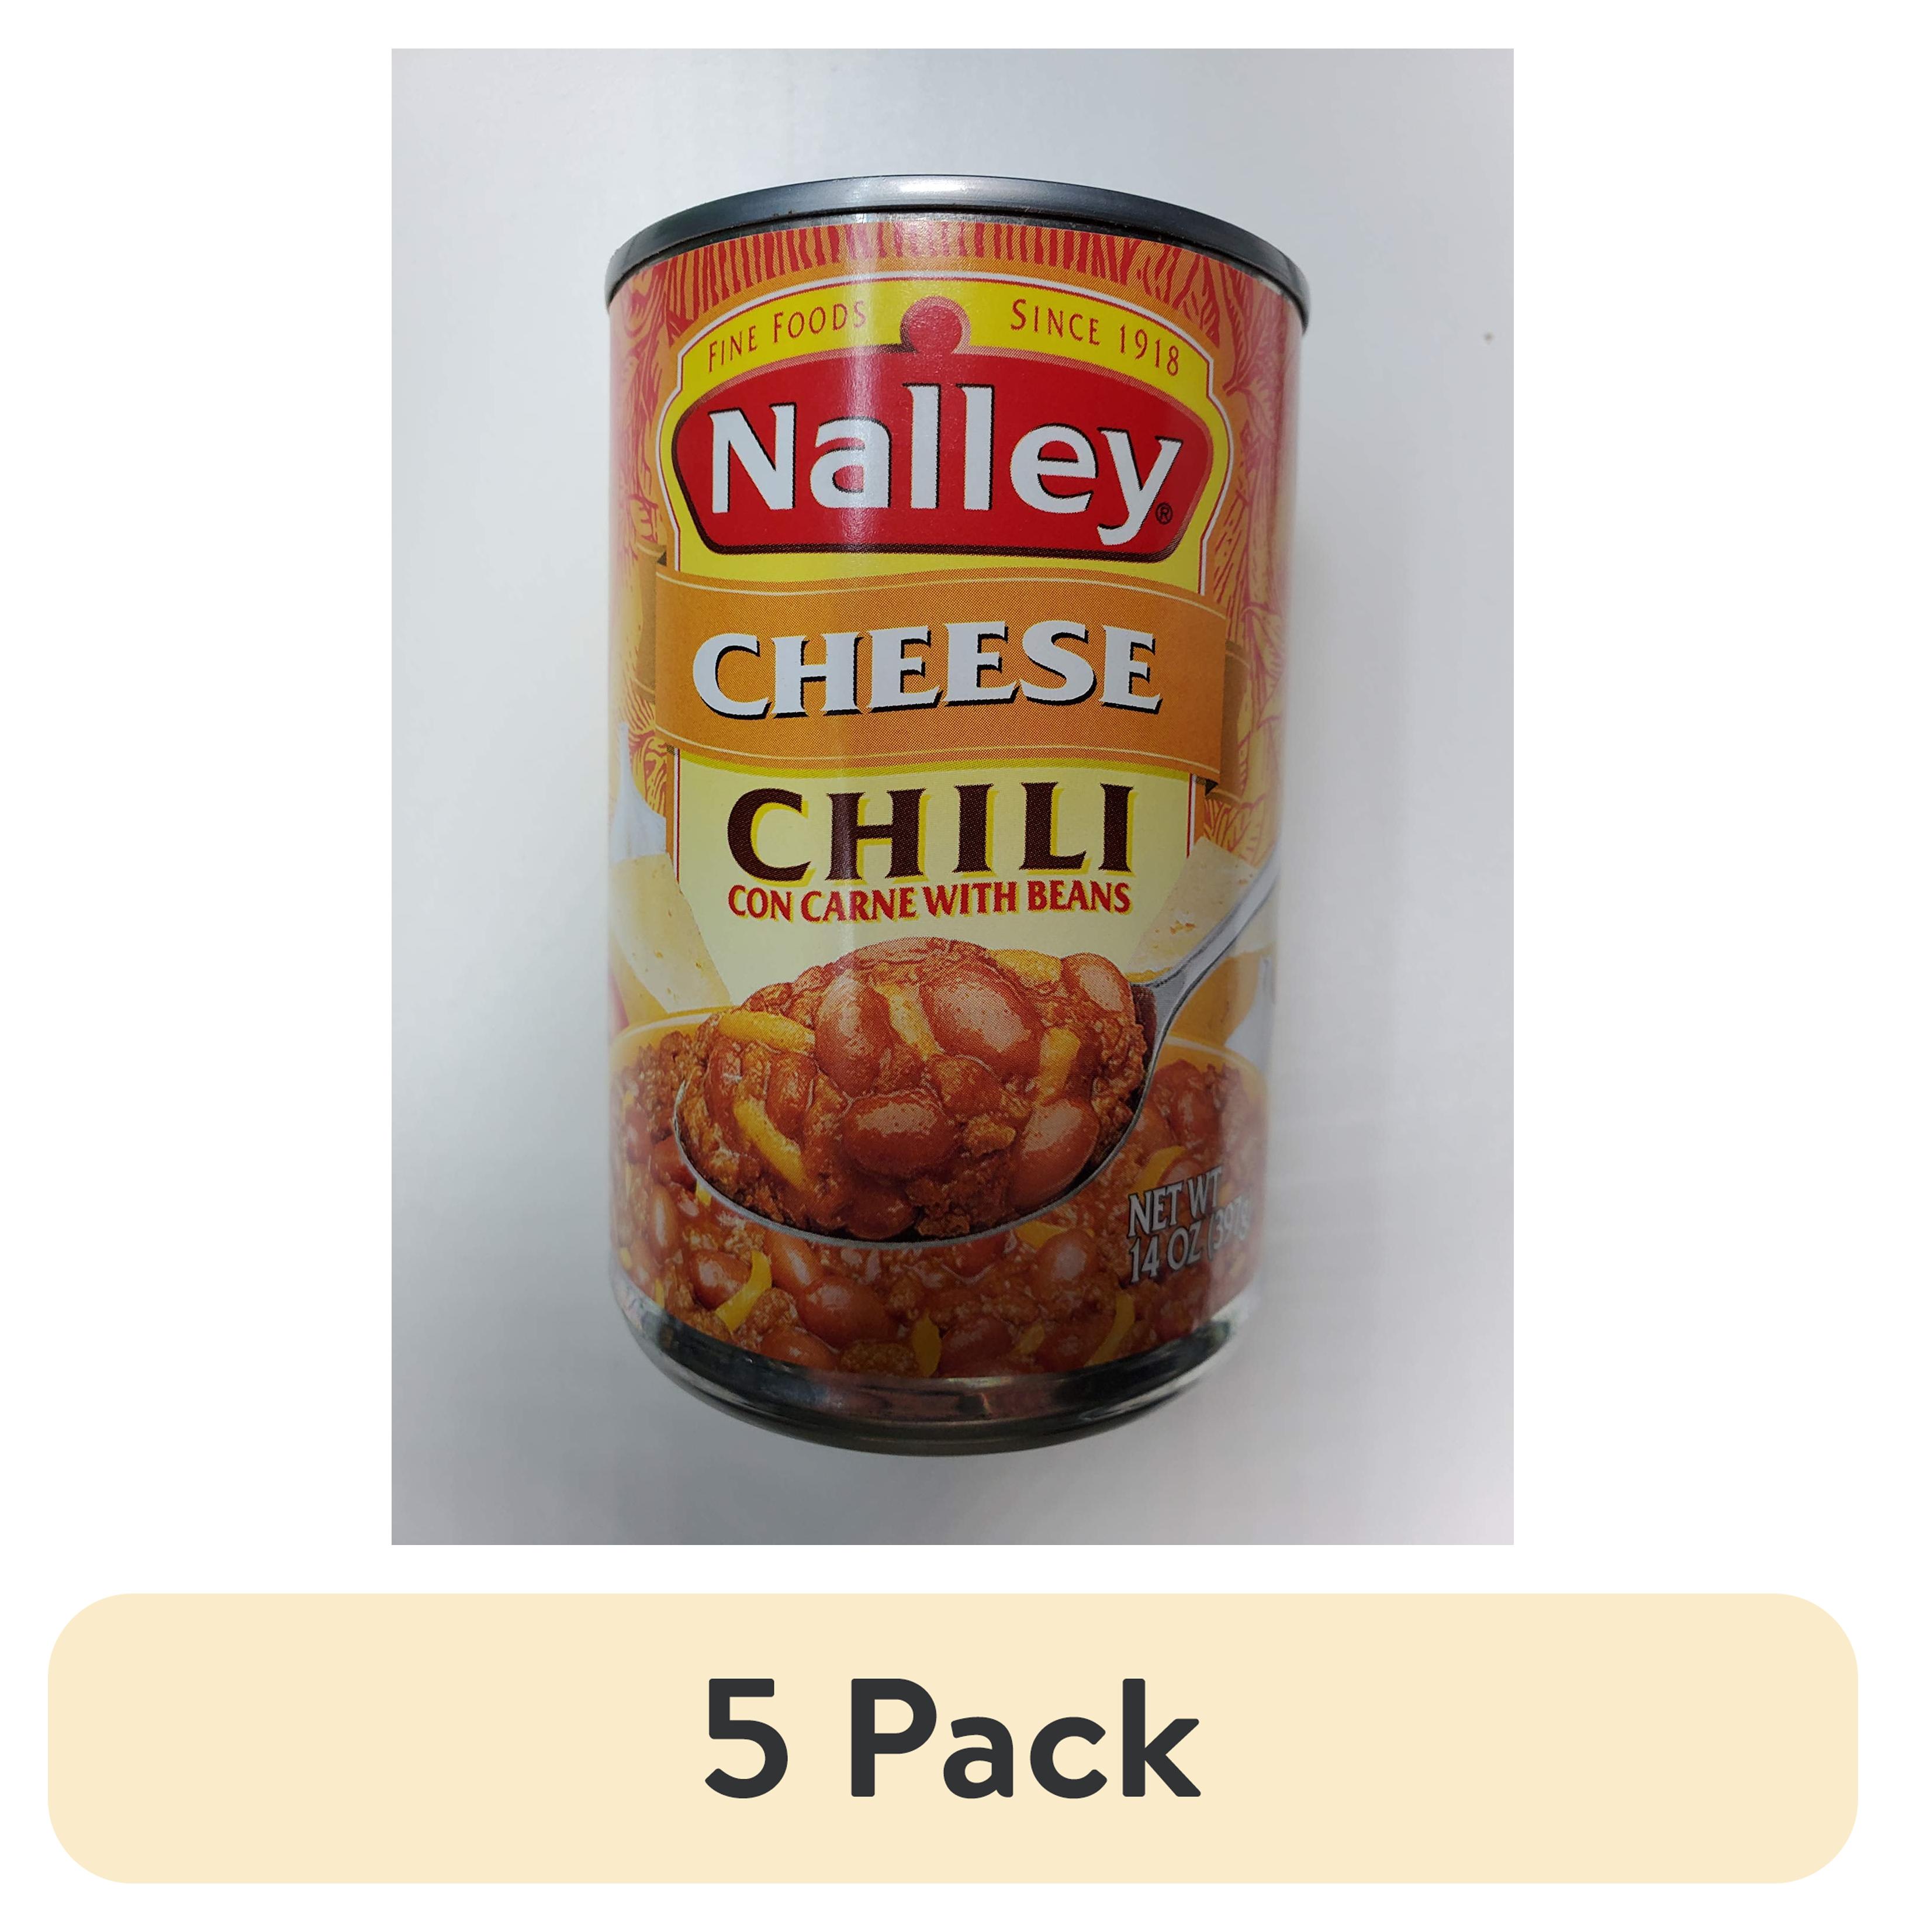 (5 pack) Nalley Cheese Chili Con Carne with Beans, 14-ounce Cans (Pack ...